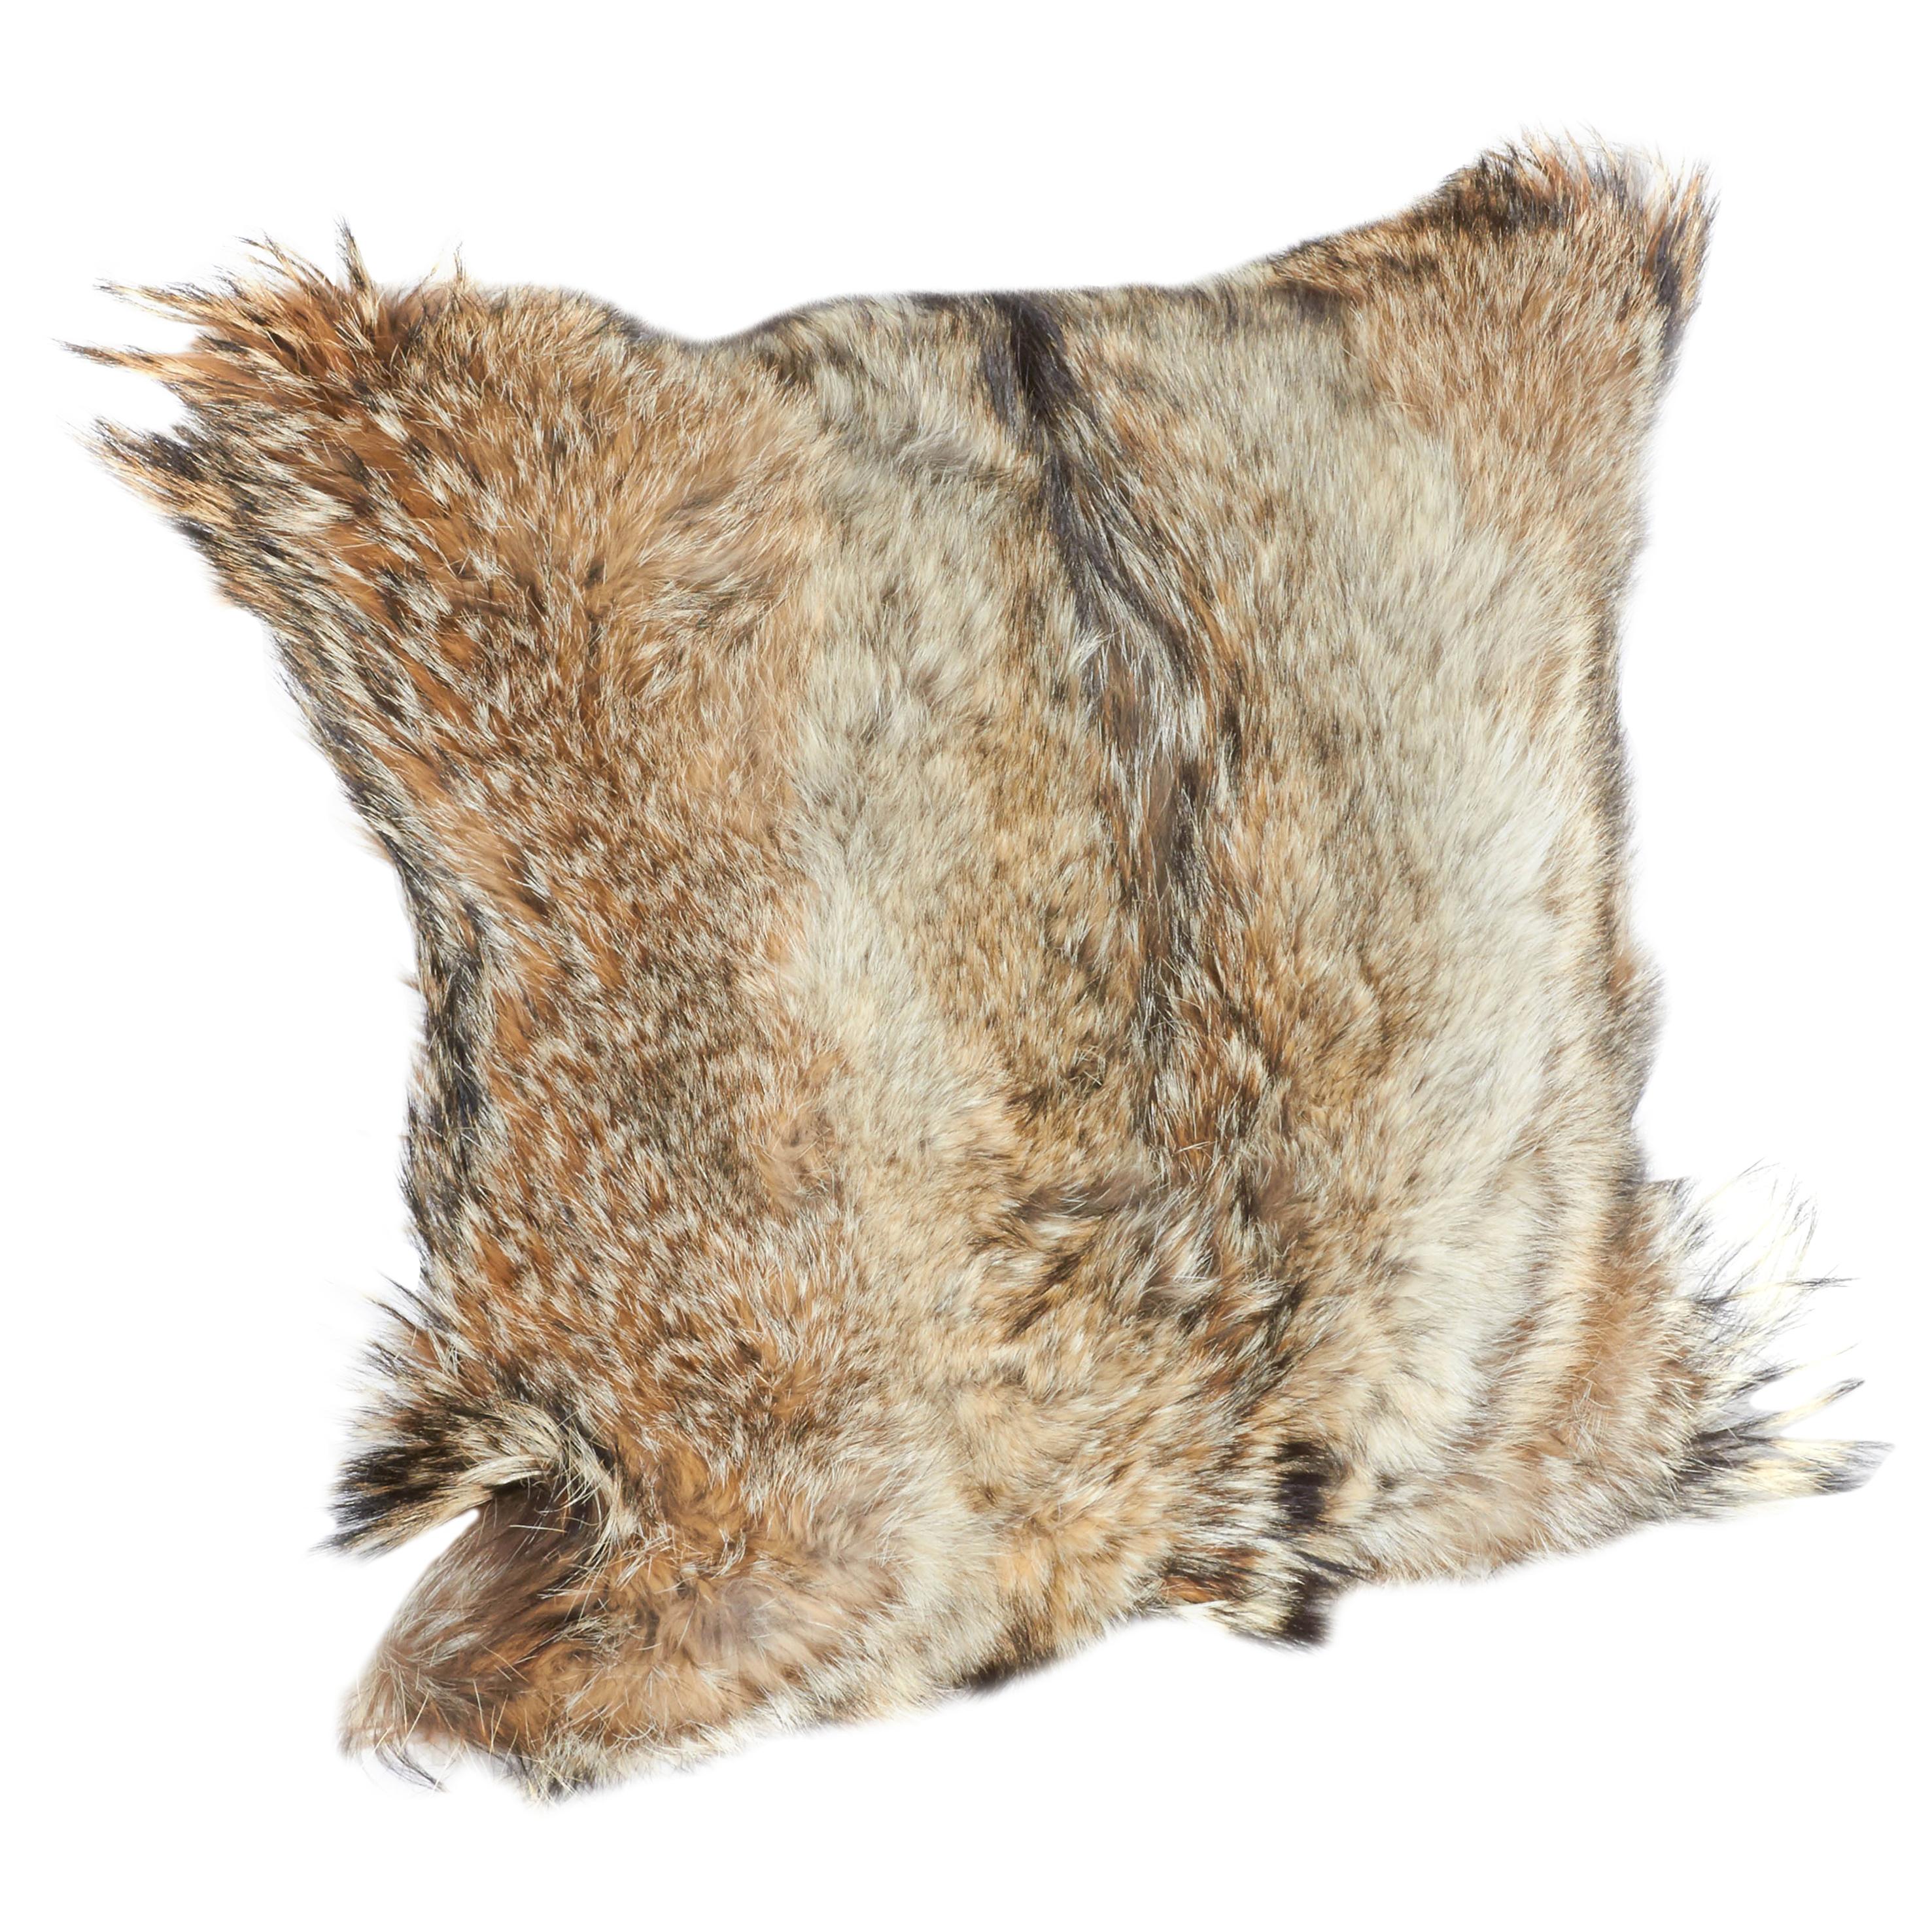 Luxury throw pillow handcrafted from genuine coyote fur in rich hues of tan, beige, ivory, and brown, with the occasional black streaks. Each pillow is unique in coloration and texture, and features hand stitched backing in fine khaki colored